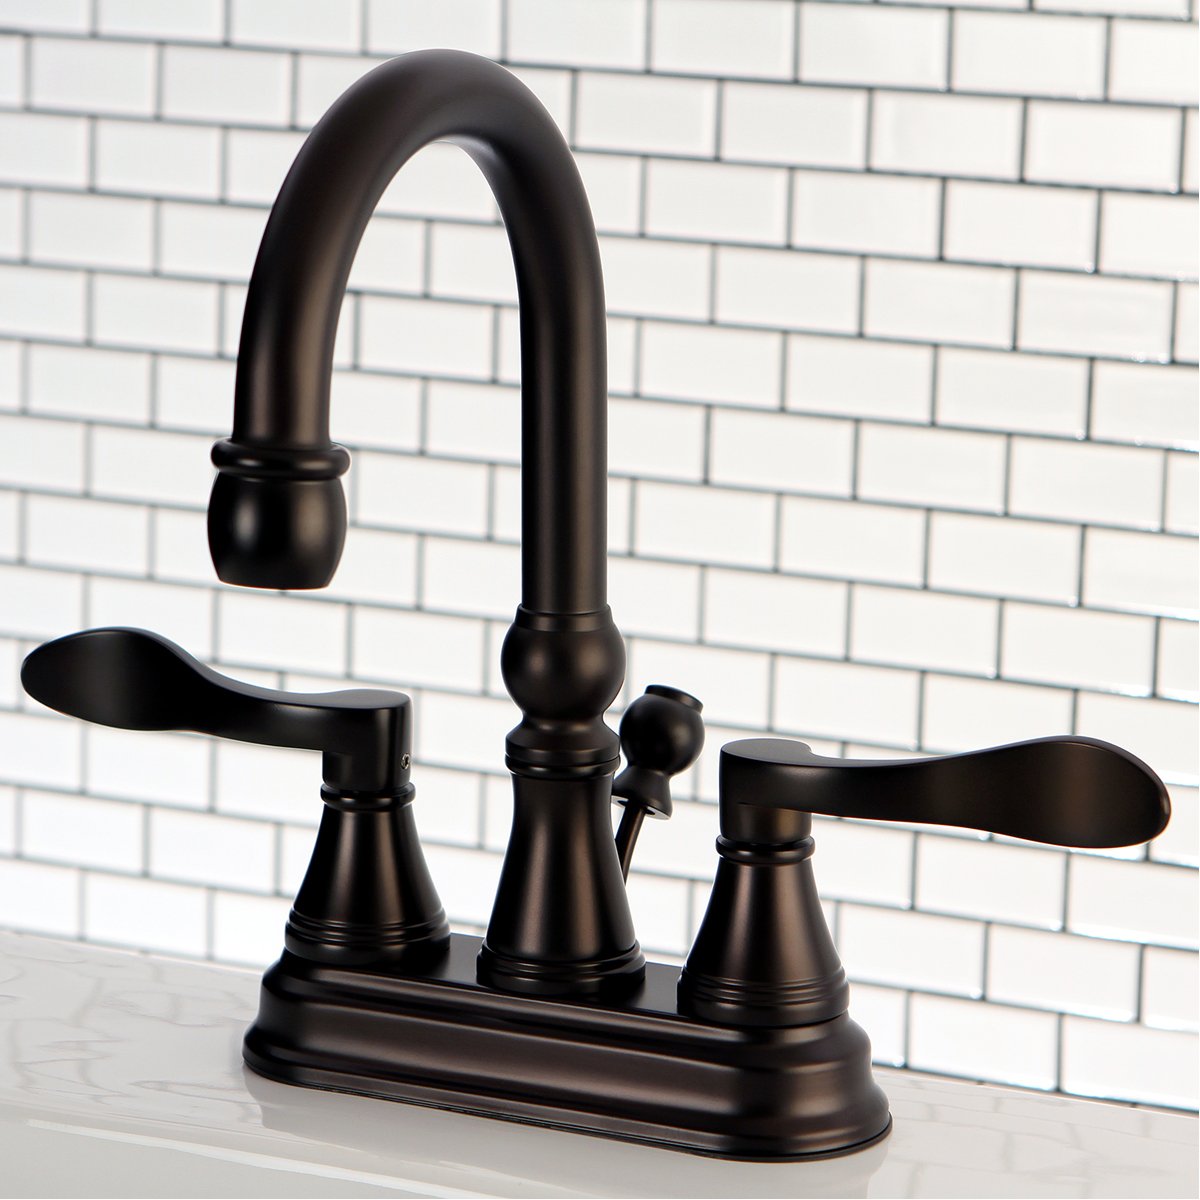 Kingston Brass NuFrench 4-Inch Centerset Bathroom Faucet